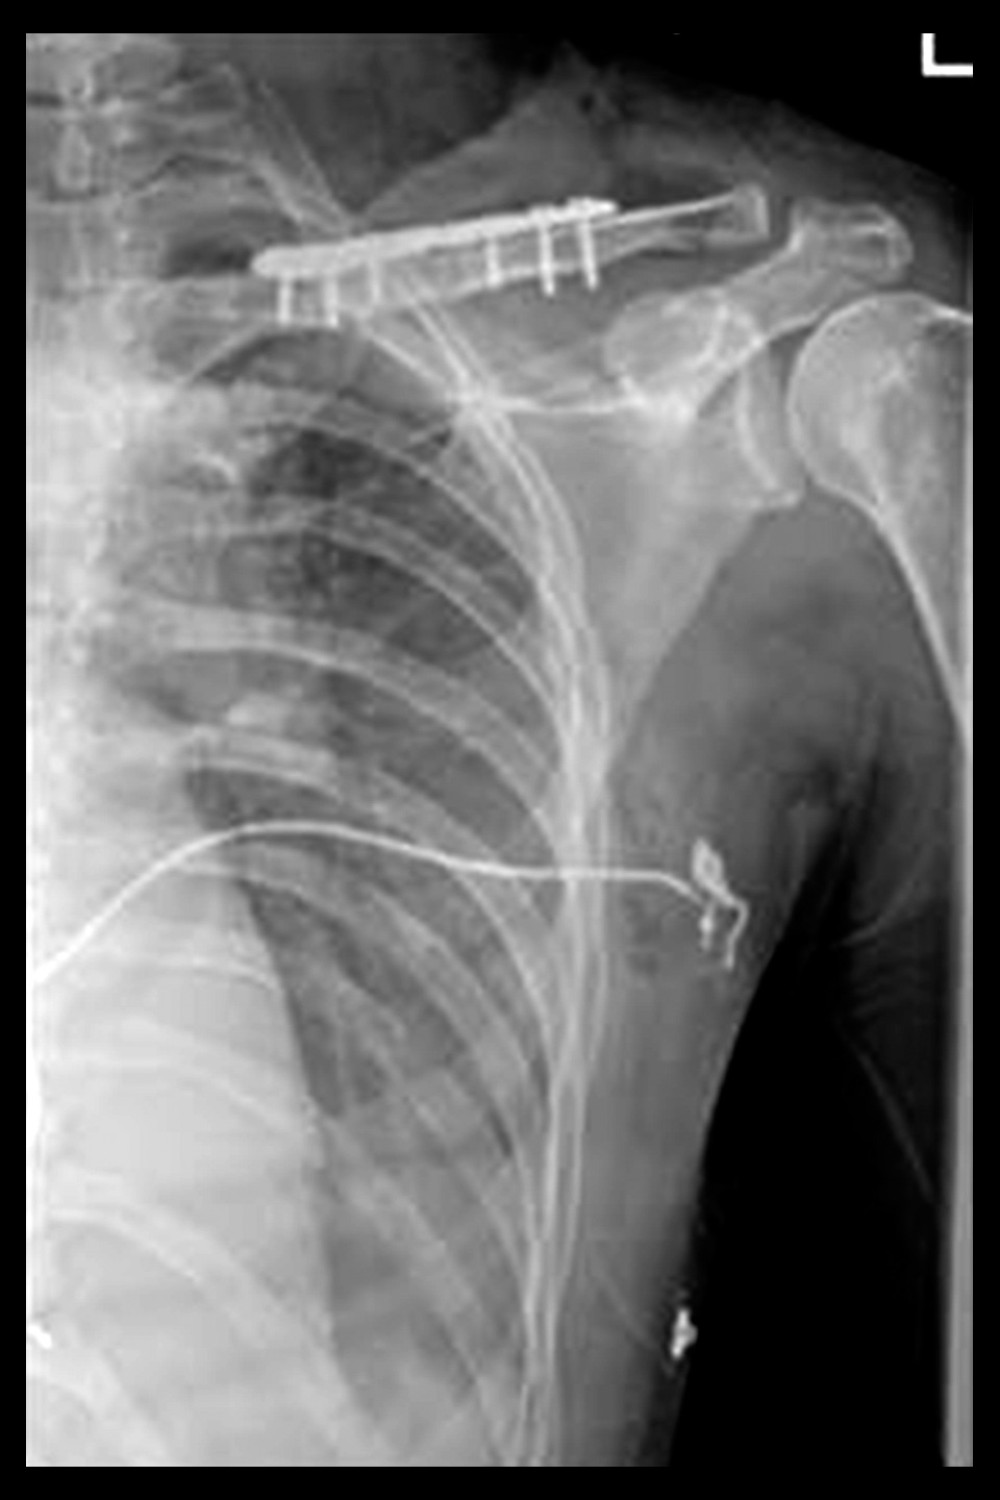 Postoperative X-ray of the clavicle fracture of the second patient.